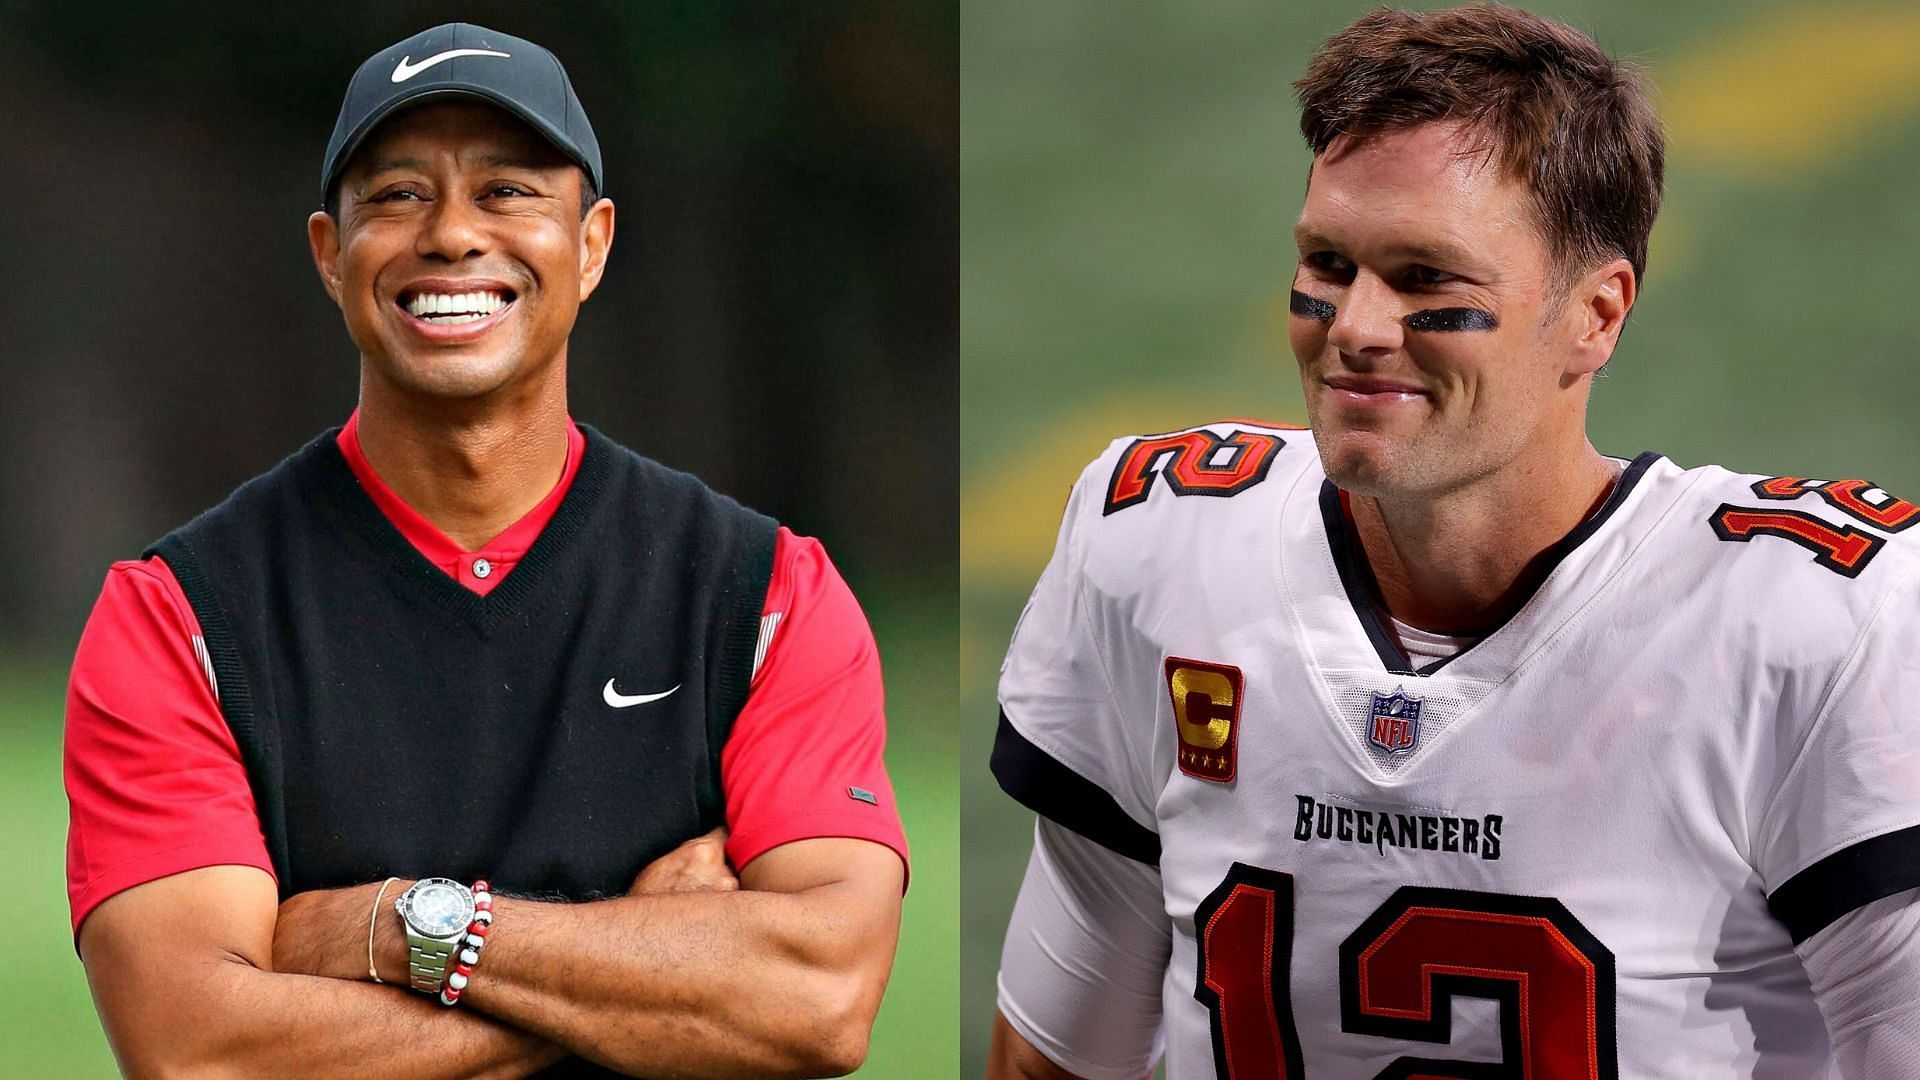 Tiger Woods vs Tom Brady net worth: Which GOAT ended up swimming in more  cash after taking sport by storm?